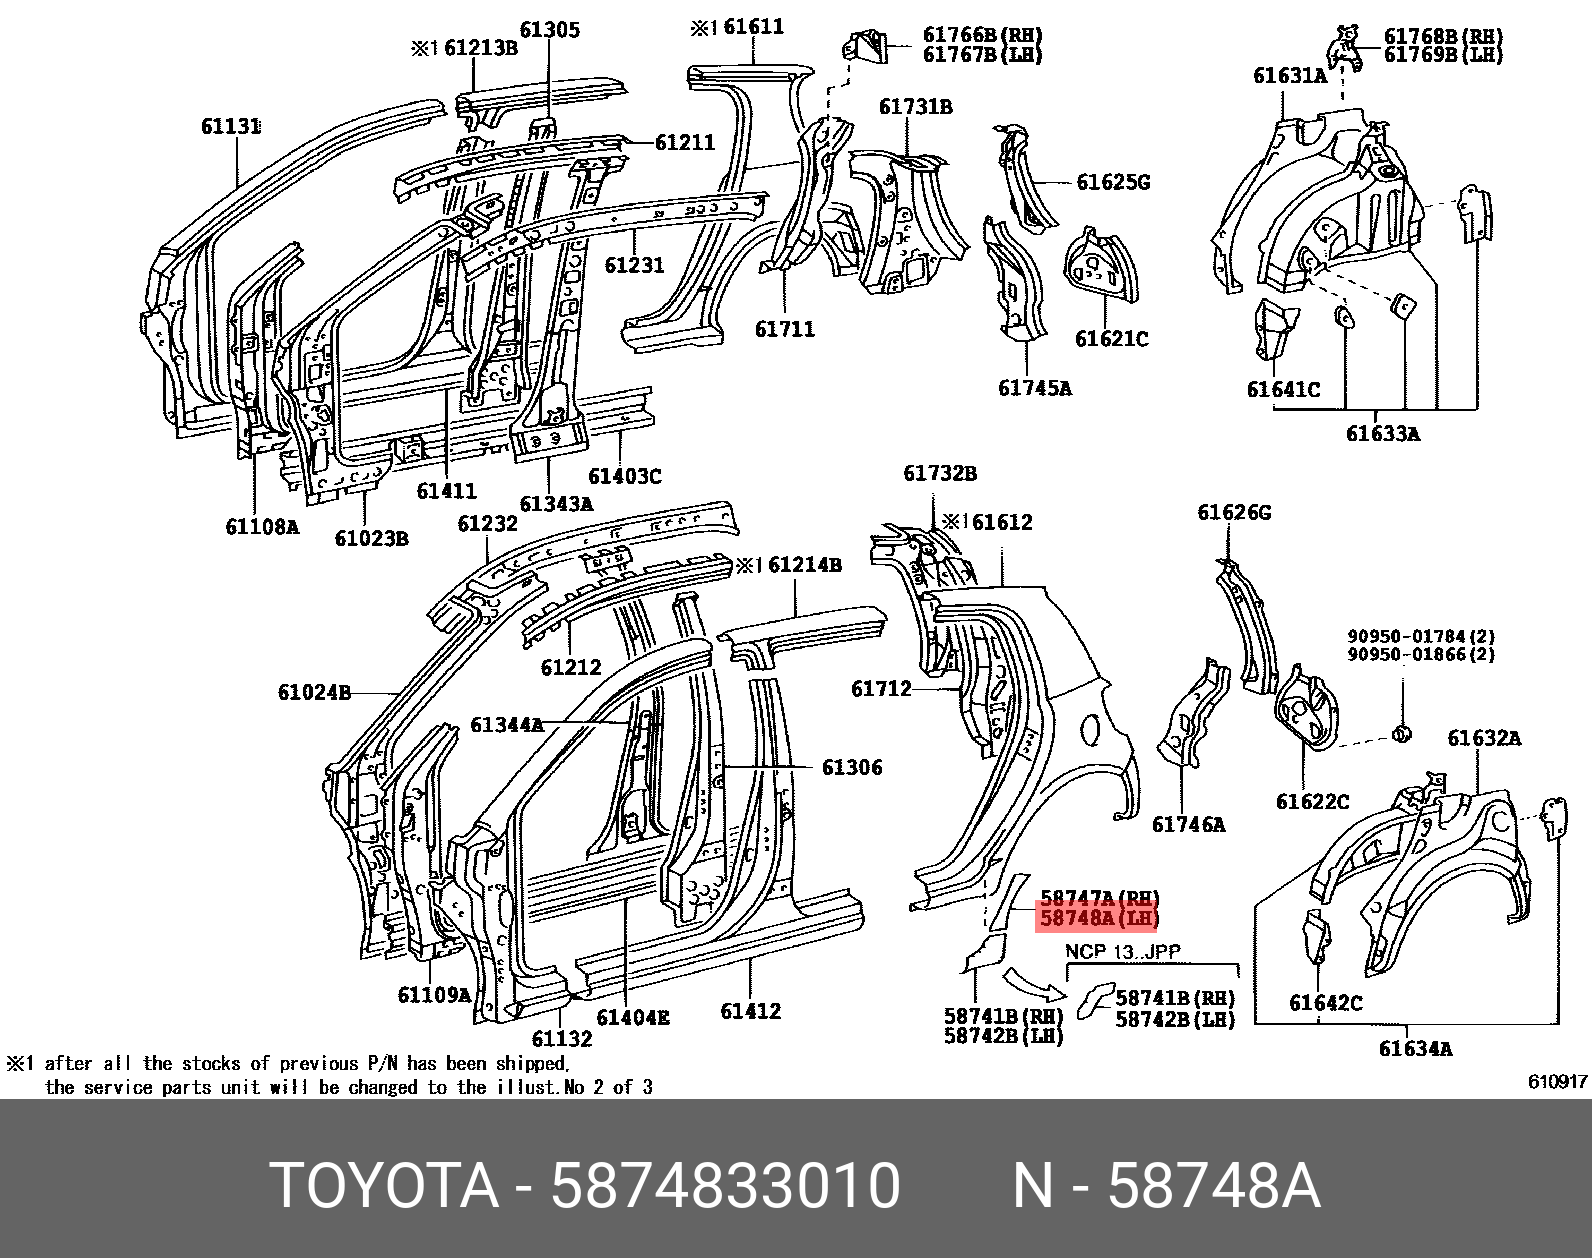 CAMRY 200109 - 200601, PROTECTOR, QUARTER PANEL, REAR LH